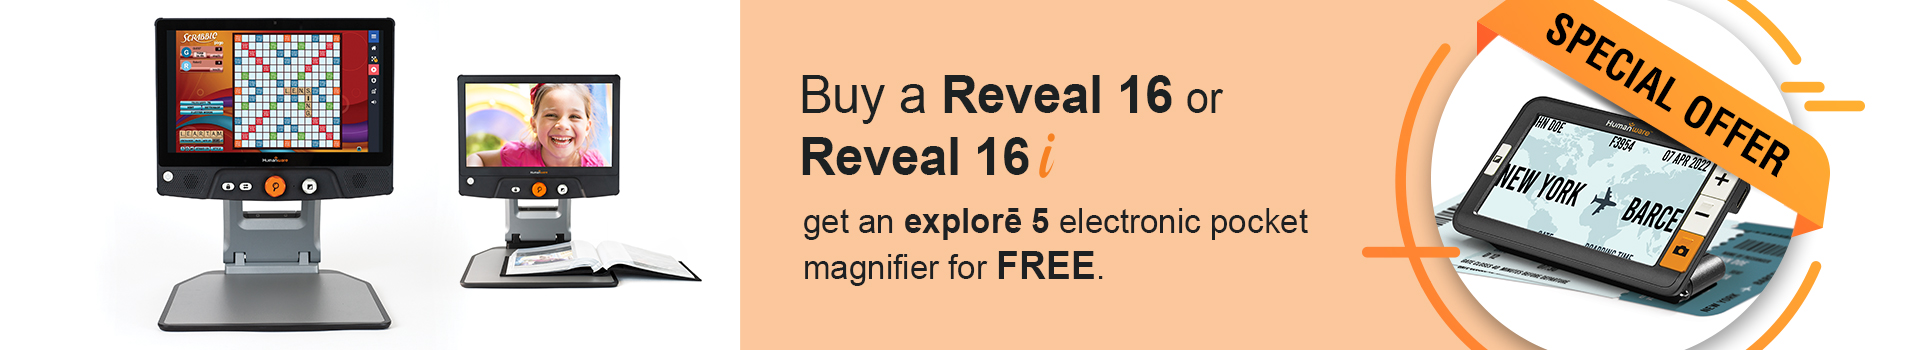 Buy a Reveal and get an explorē 5 for FREE